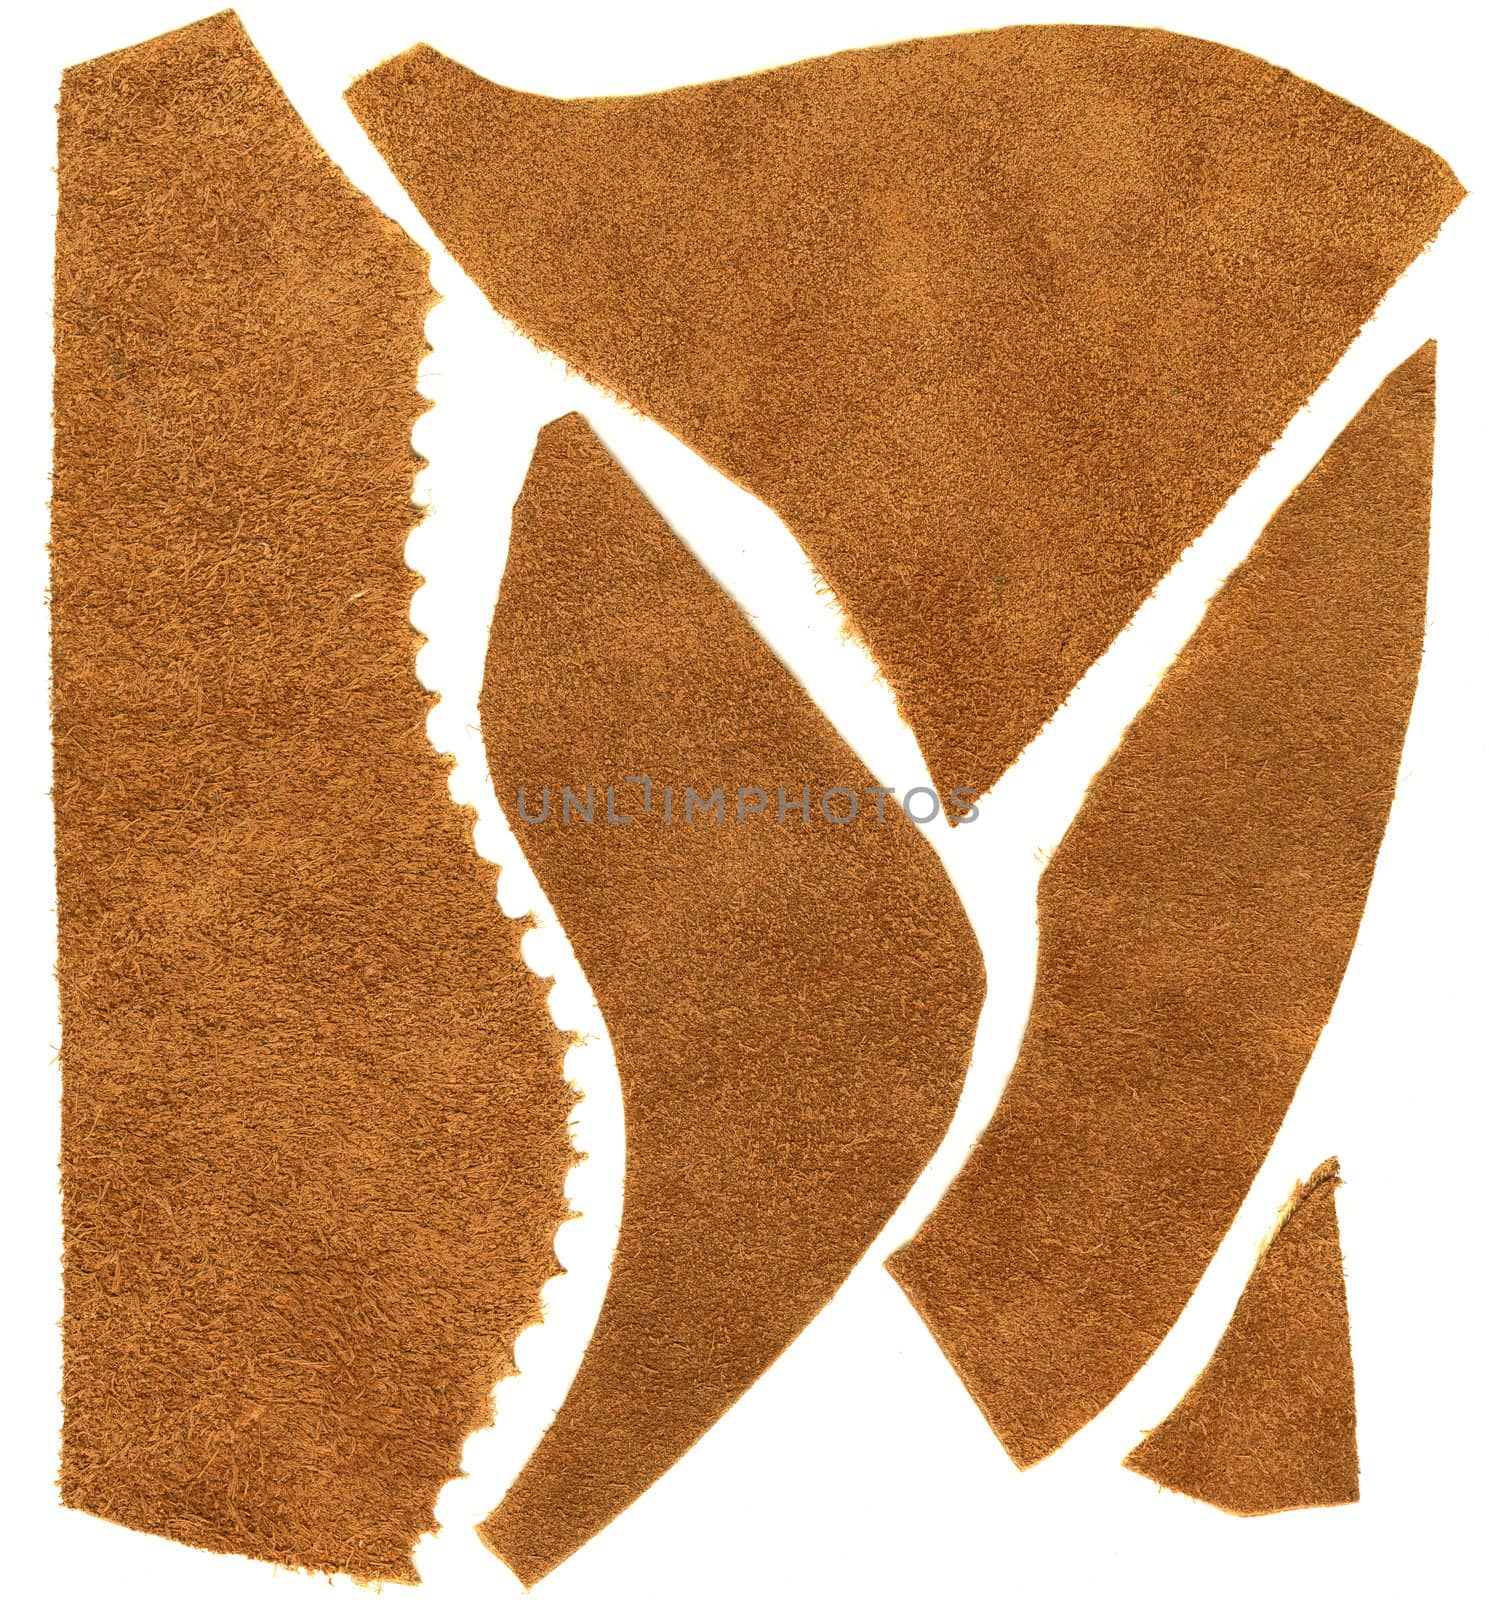 soft brown leather (unfinished side) - scraps of different shapes and edges on white background